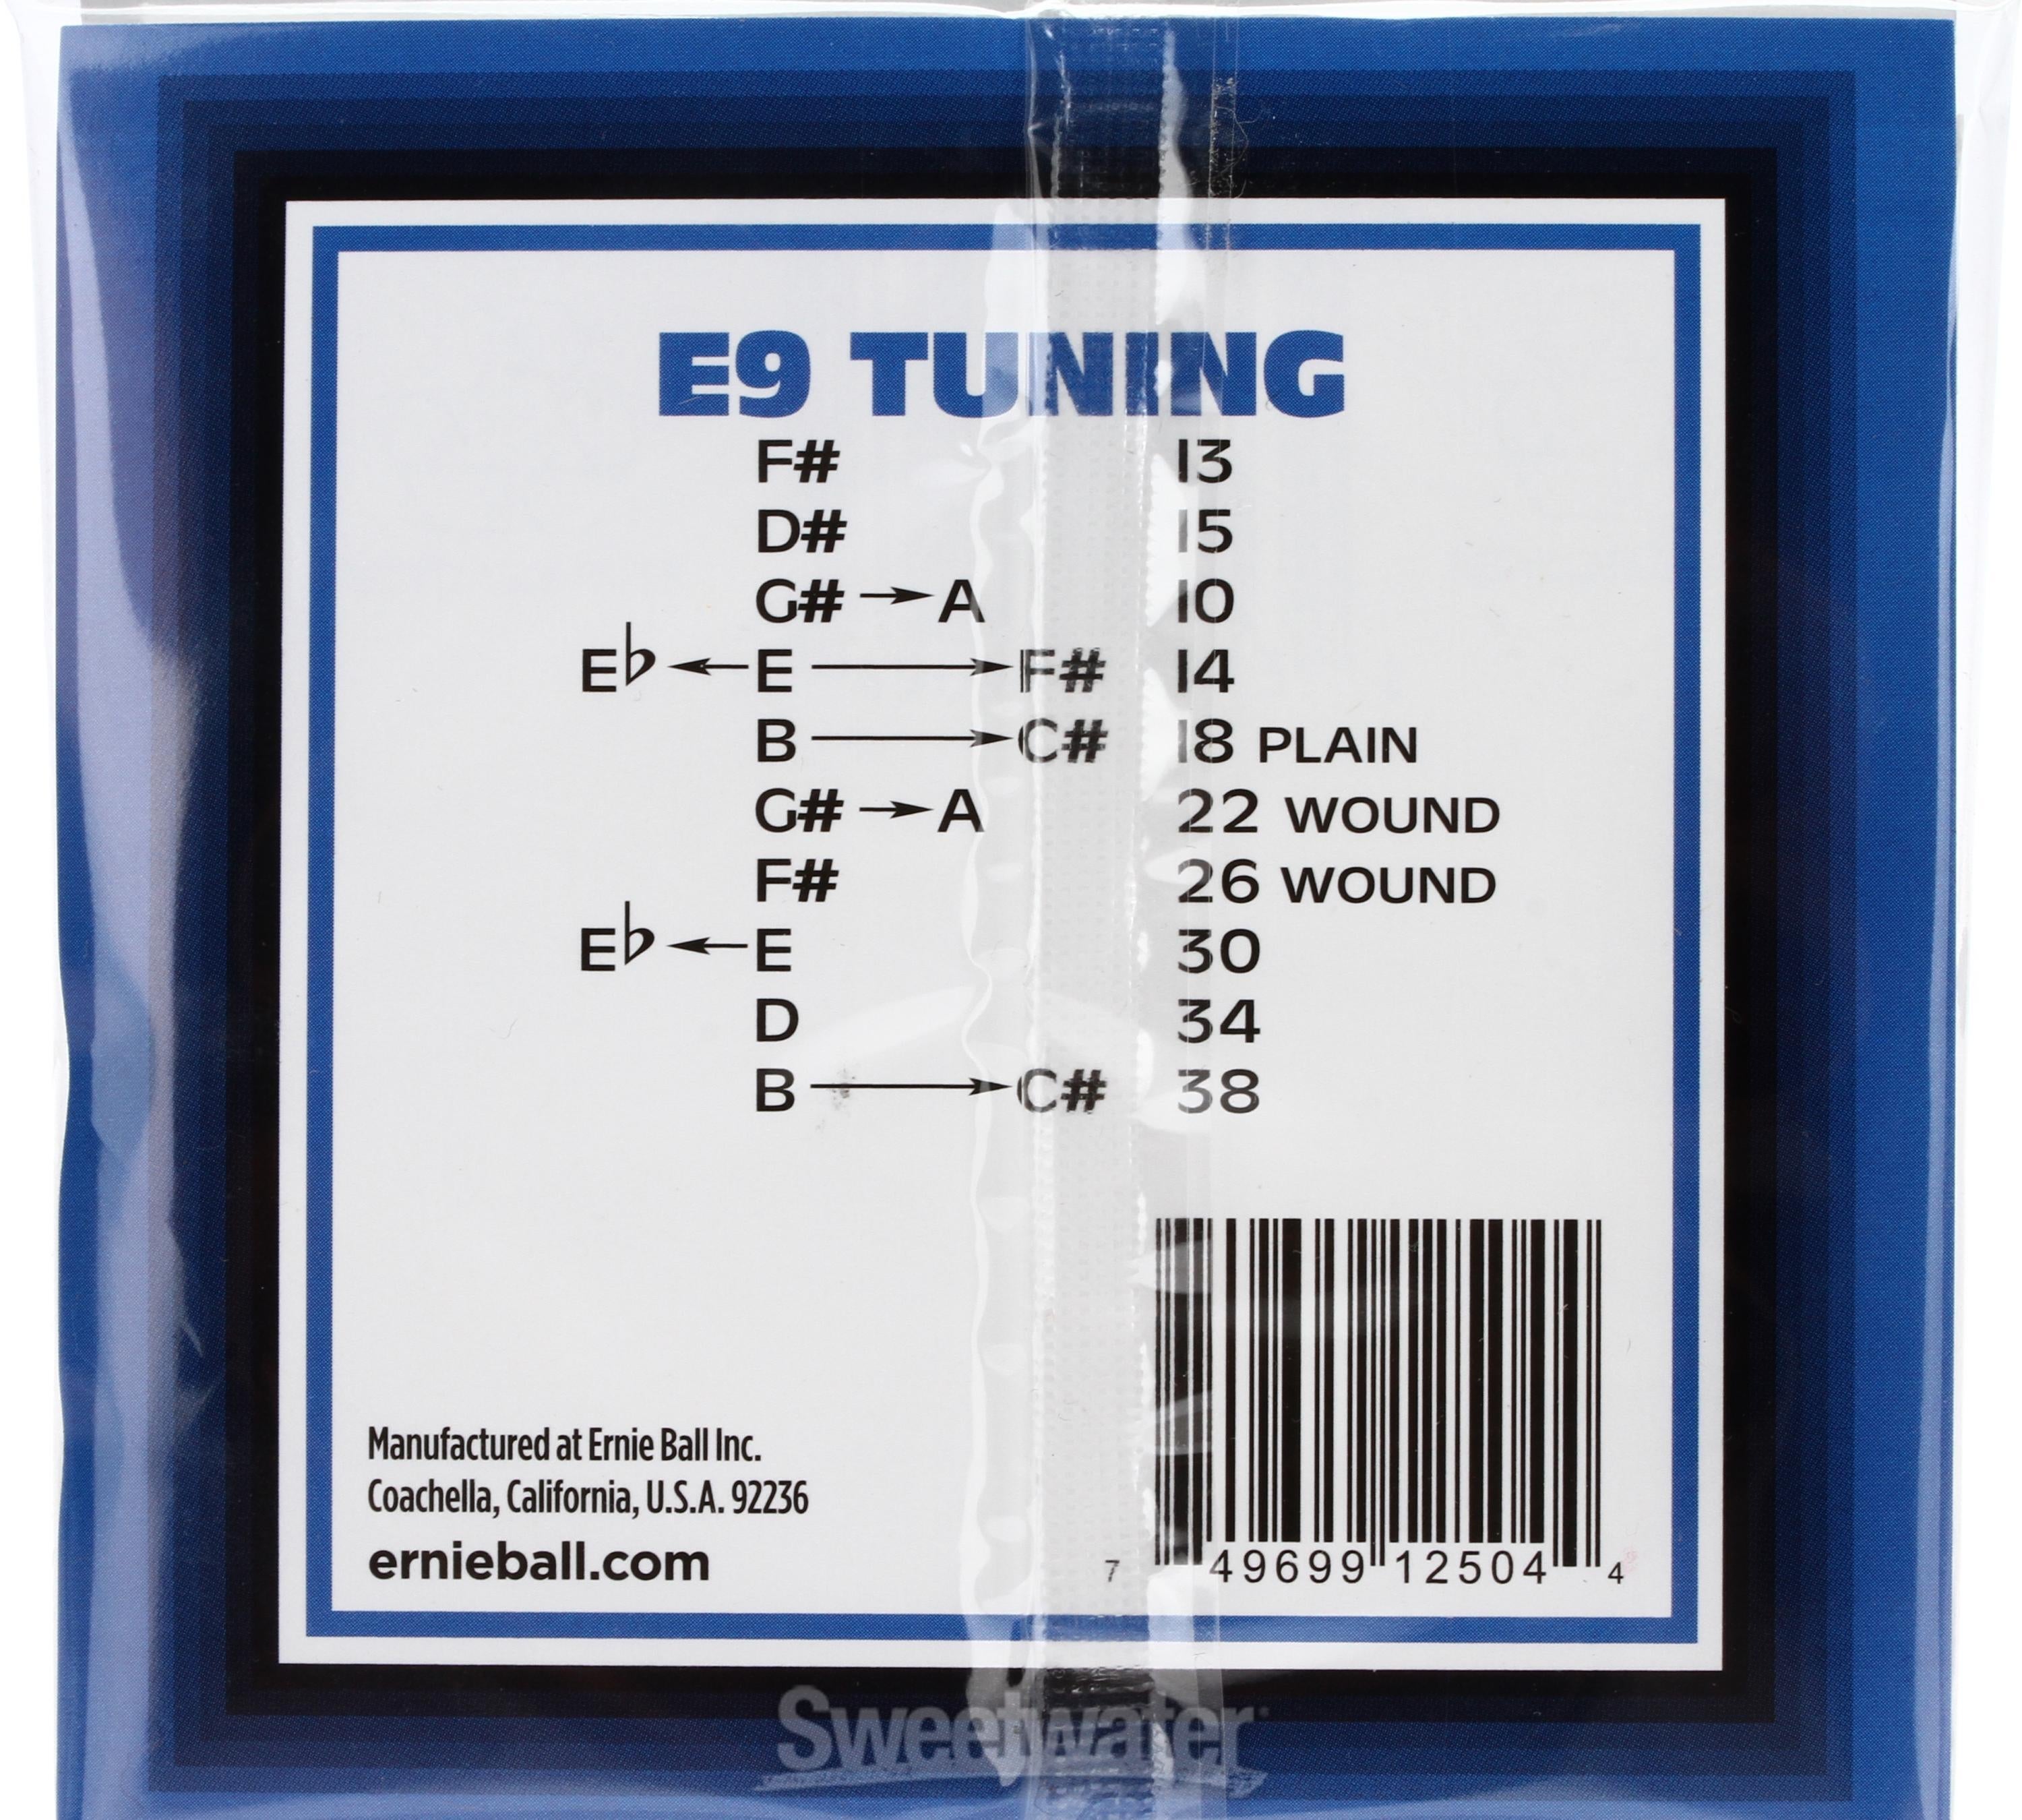 Ernie Ball 2504 Pedal Steel E9 Tuning Stainless Steel Guitar Strings  .013-.038 10-string Sweetwater